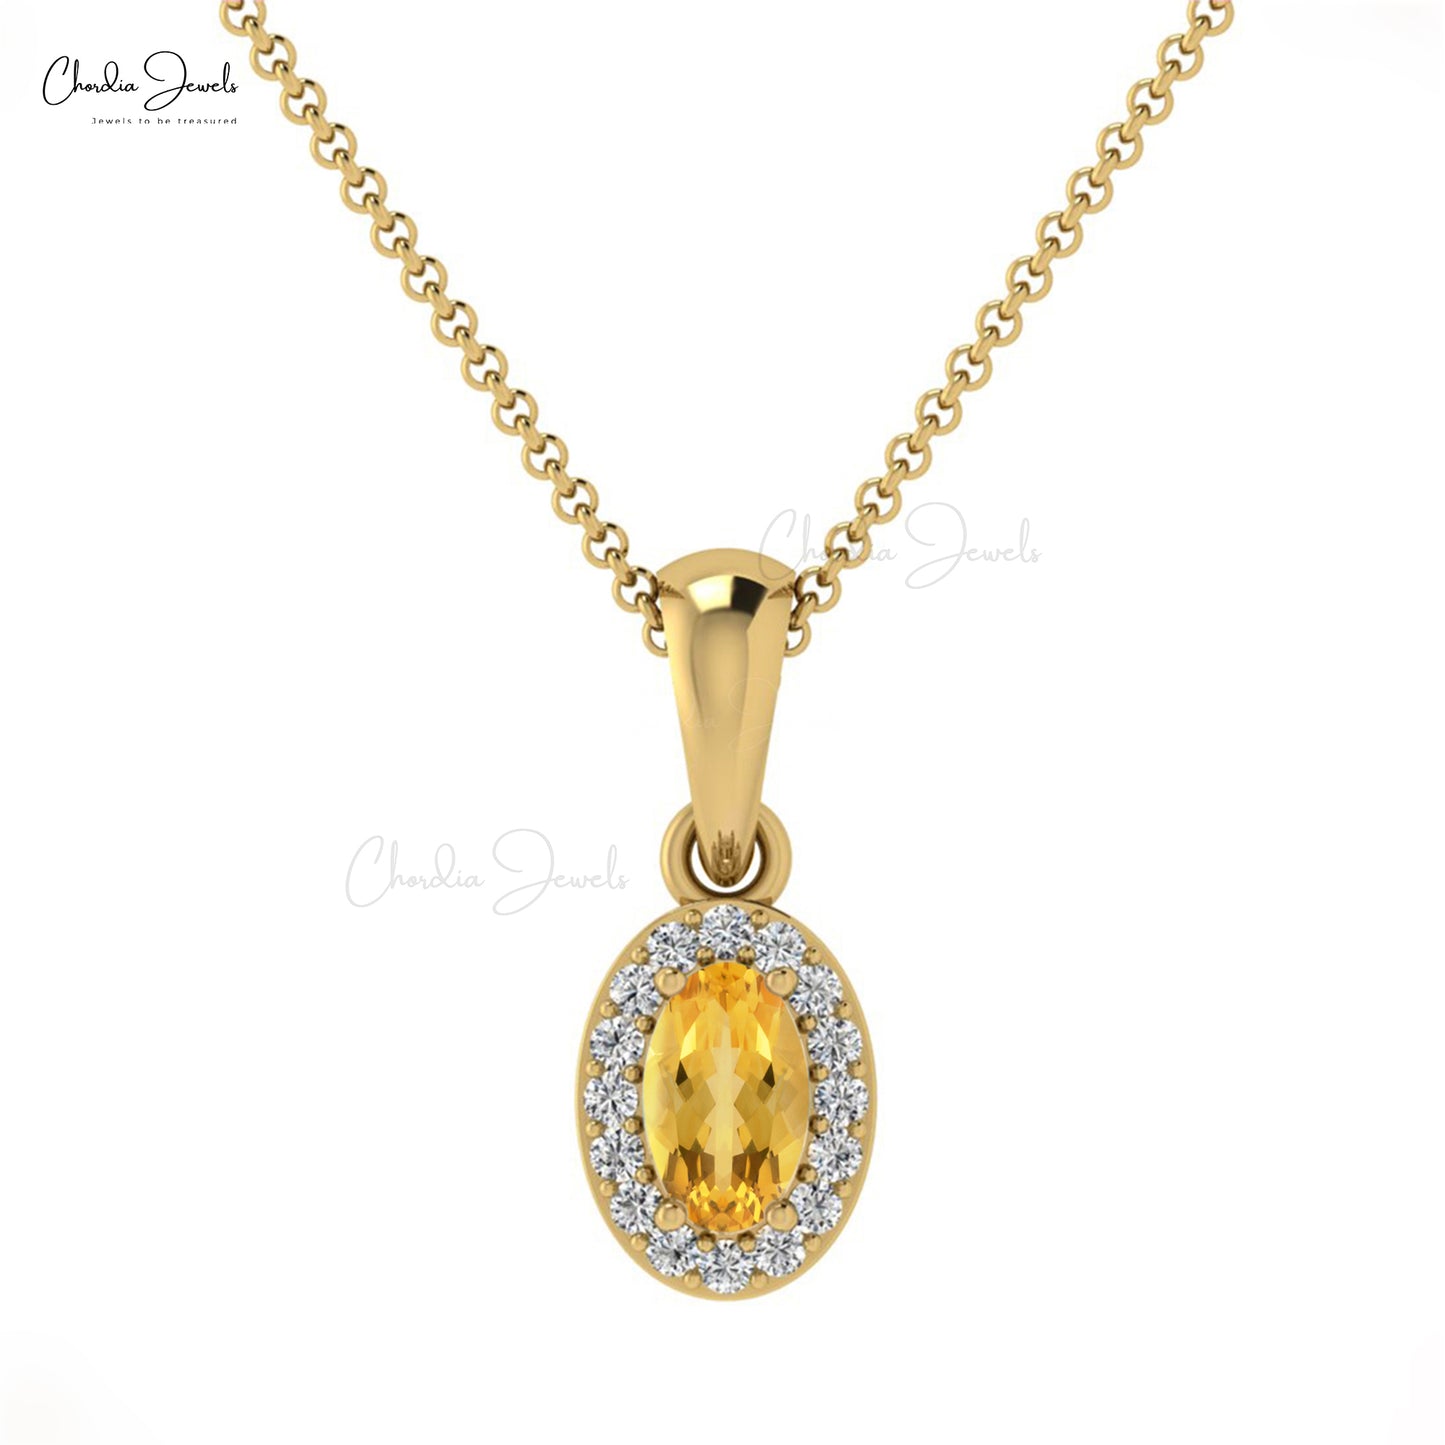 Natural Citrine Halo Pendant 14k Real Gold Diamond Surrounded Pendant 5x3mm Oval Gemstone Hallmarked Fine Jewelry For Bridal Gift